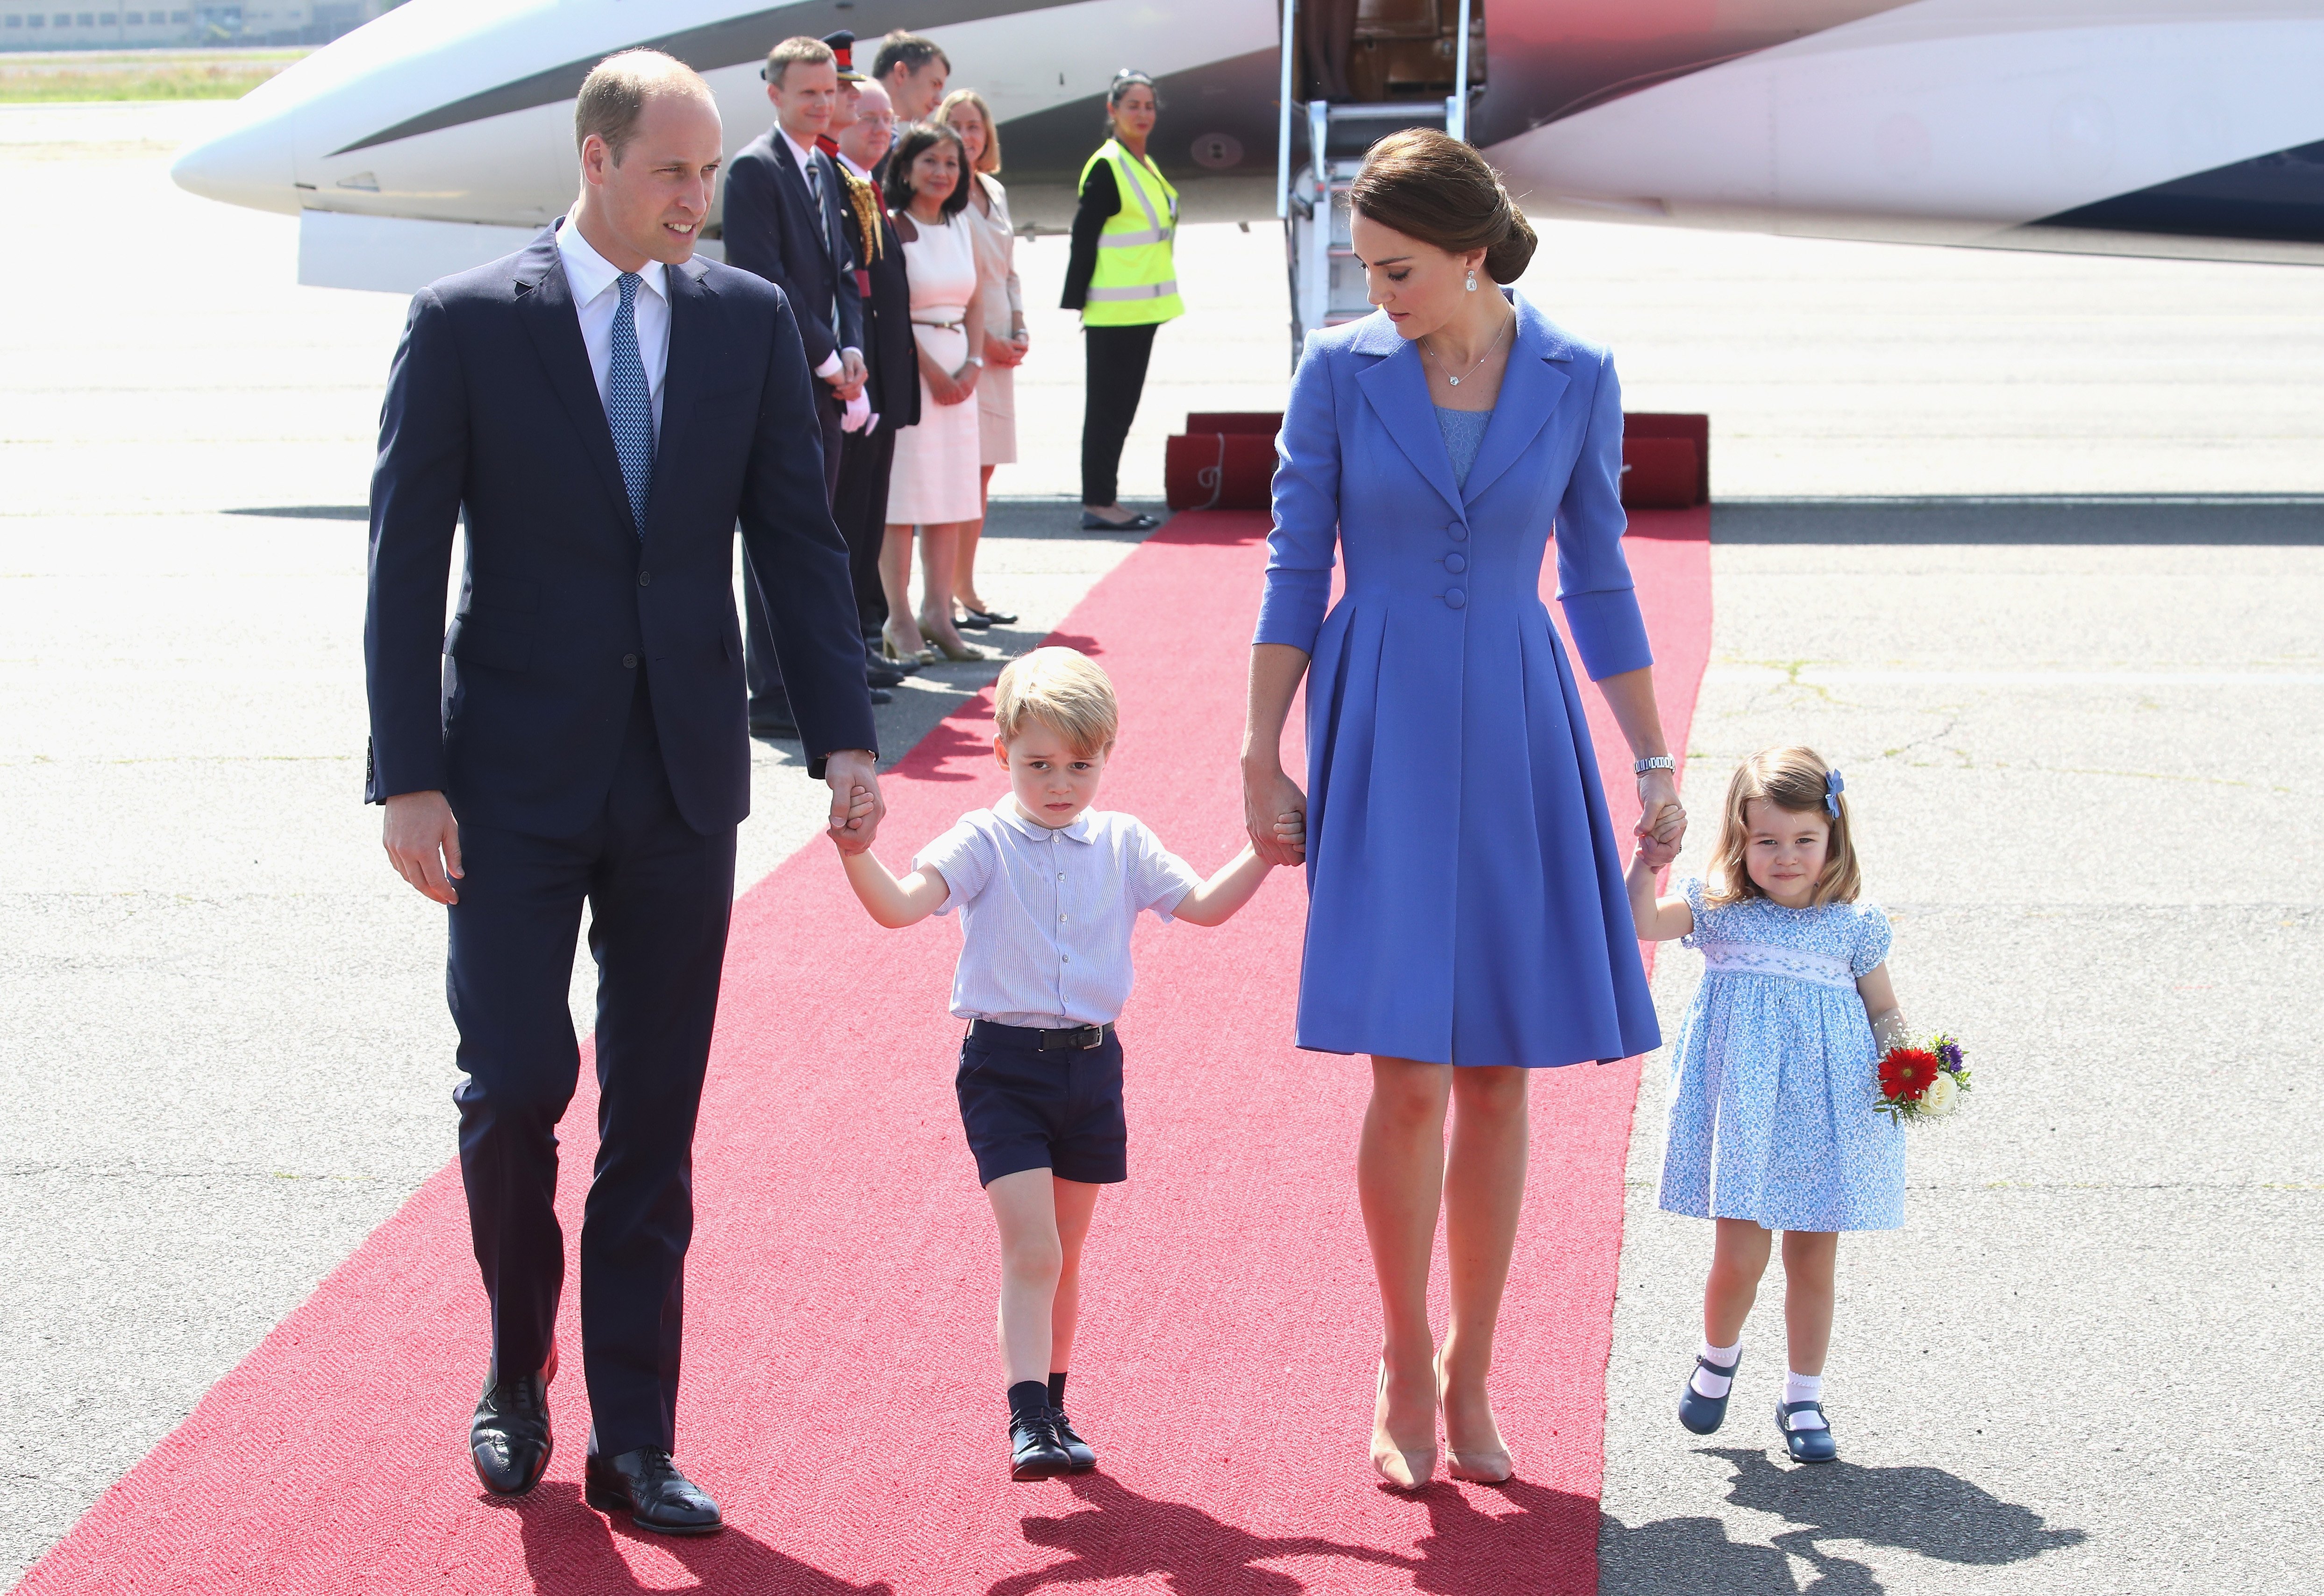  Prince William, Duke of Cambridge, Catherine, Duchess of Cambridge, Prince George of Cambridge and Princess Charlotte of Cambridge arrive at Berlin Tegel Airport during an official visit to Poland and Germany on July 19, 2017  | Photo: GettyImages